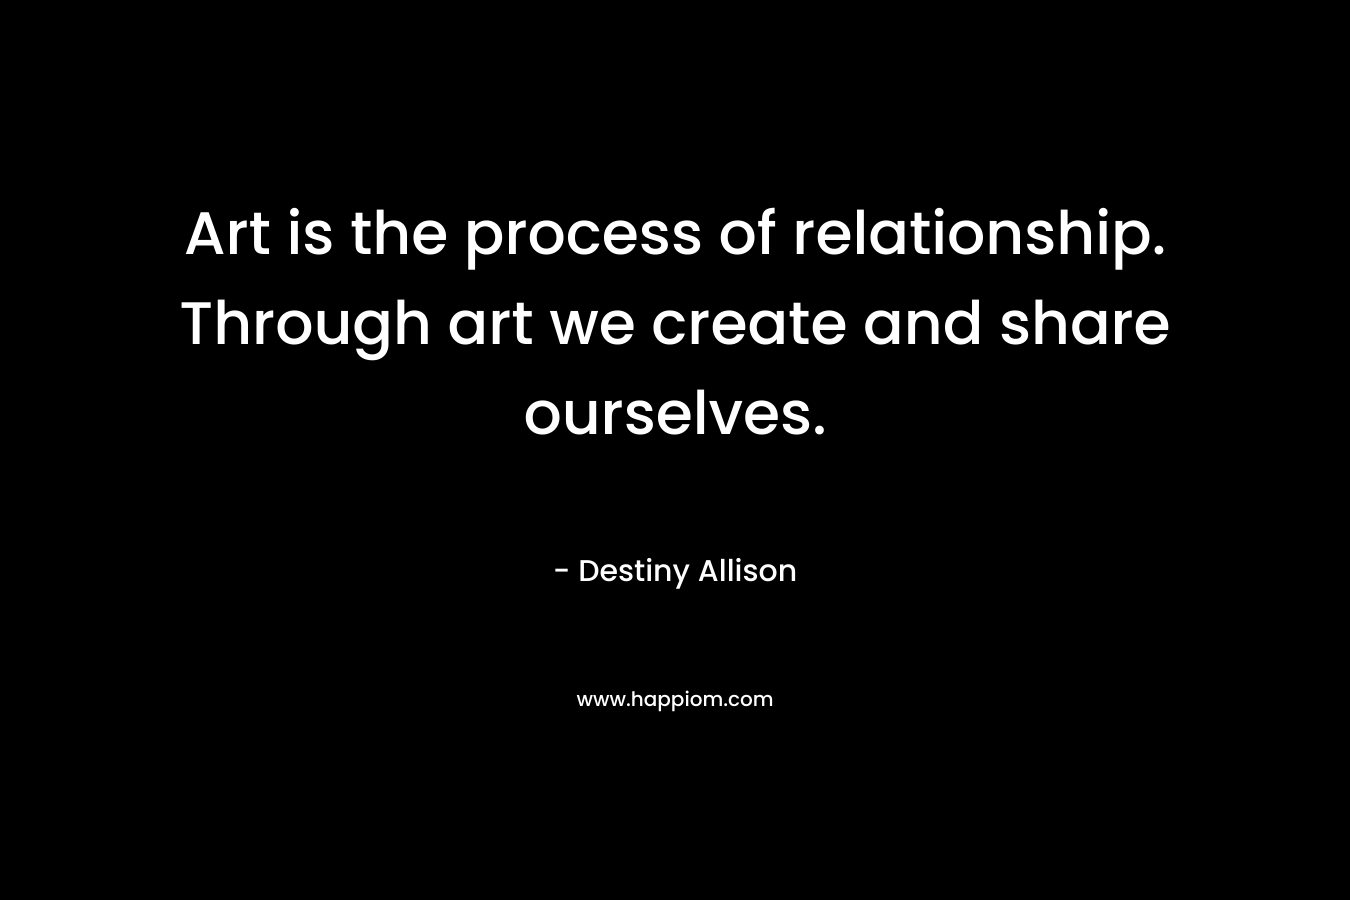 Art is the process of relationship. Through art we create and share ourselves. – Destiny Allison